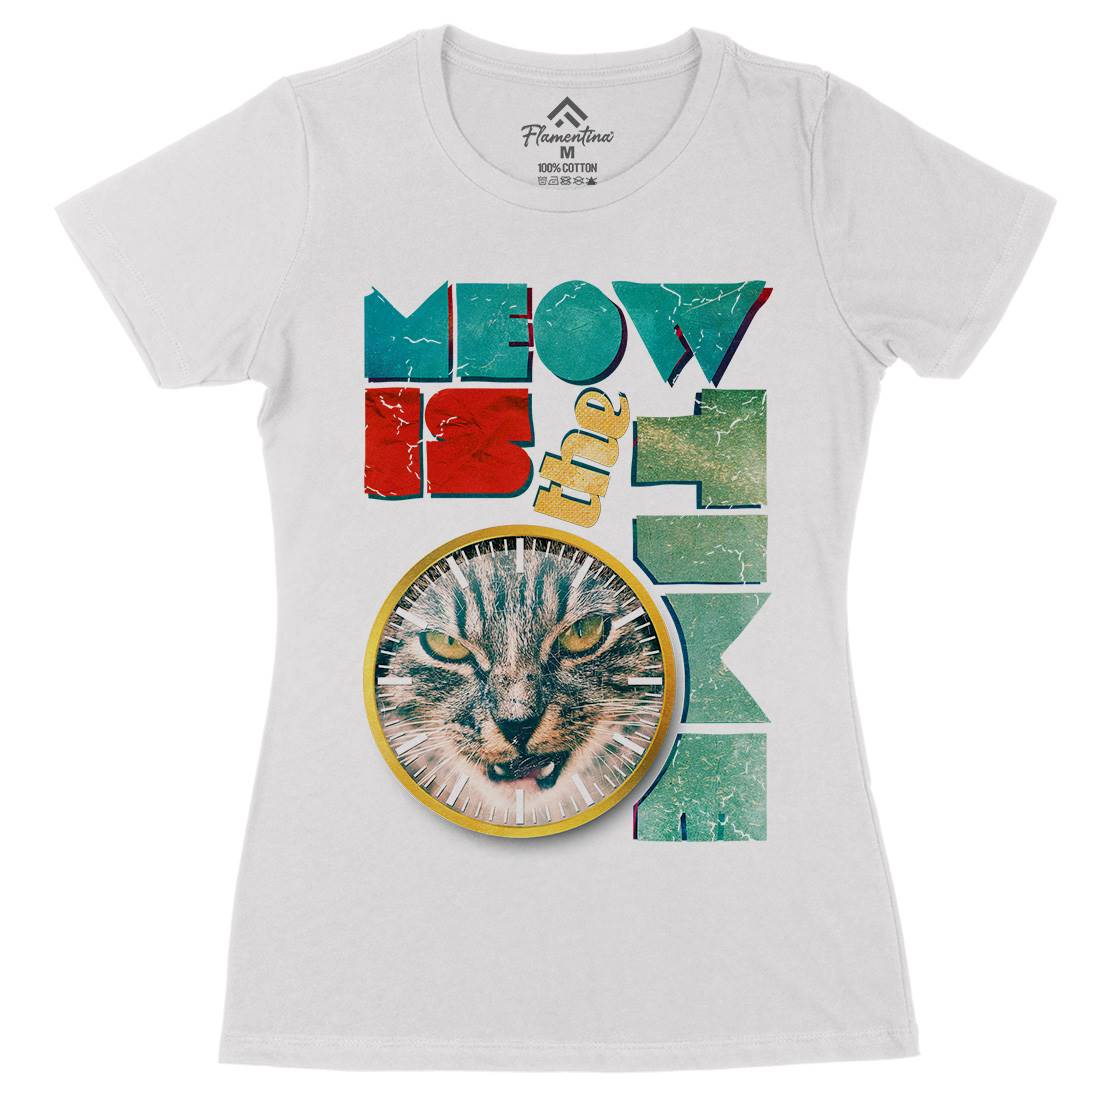 Meow Is The Time Womens Organic Crew Neck T-Shirt Animals A876